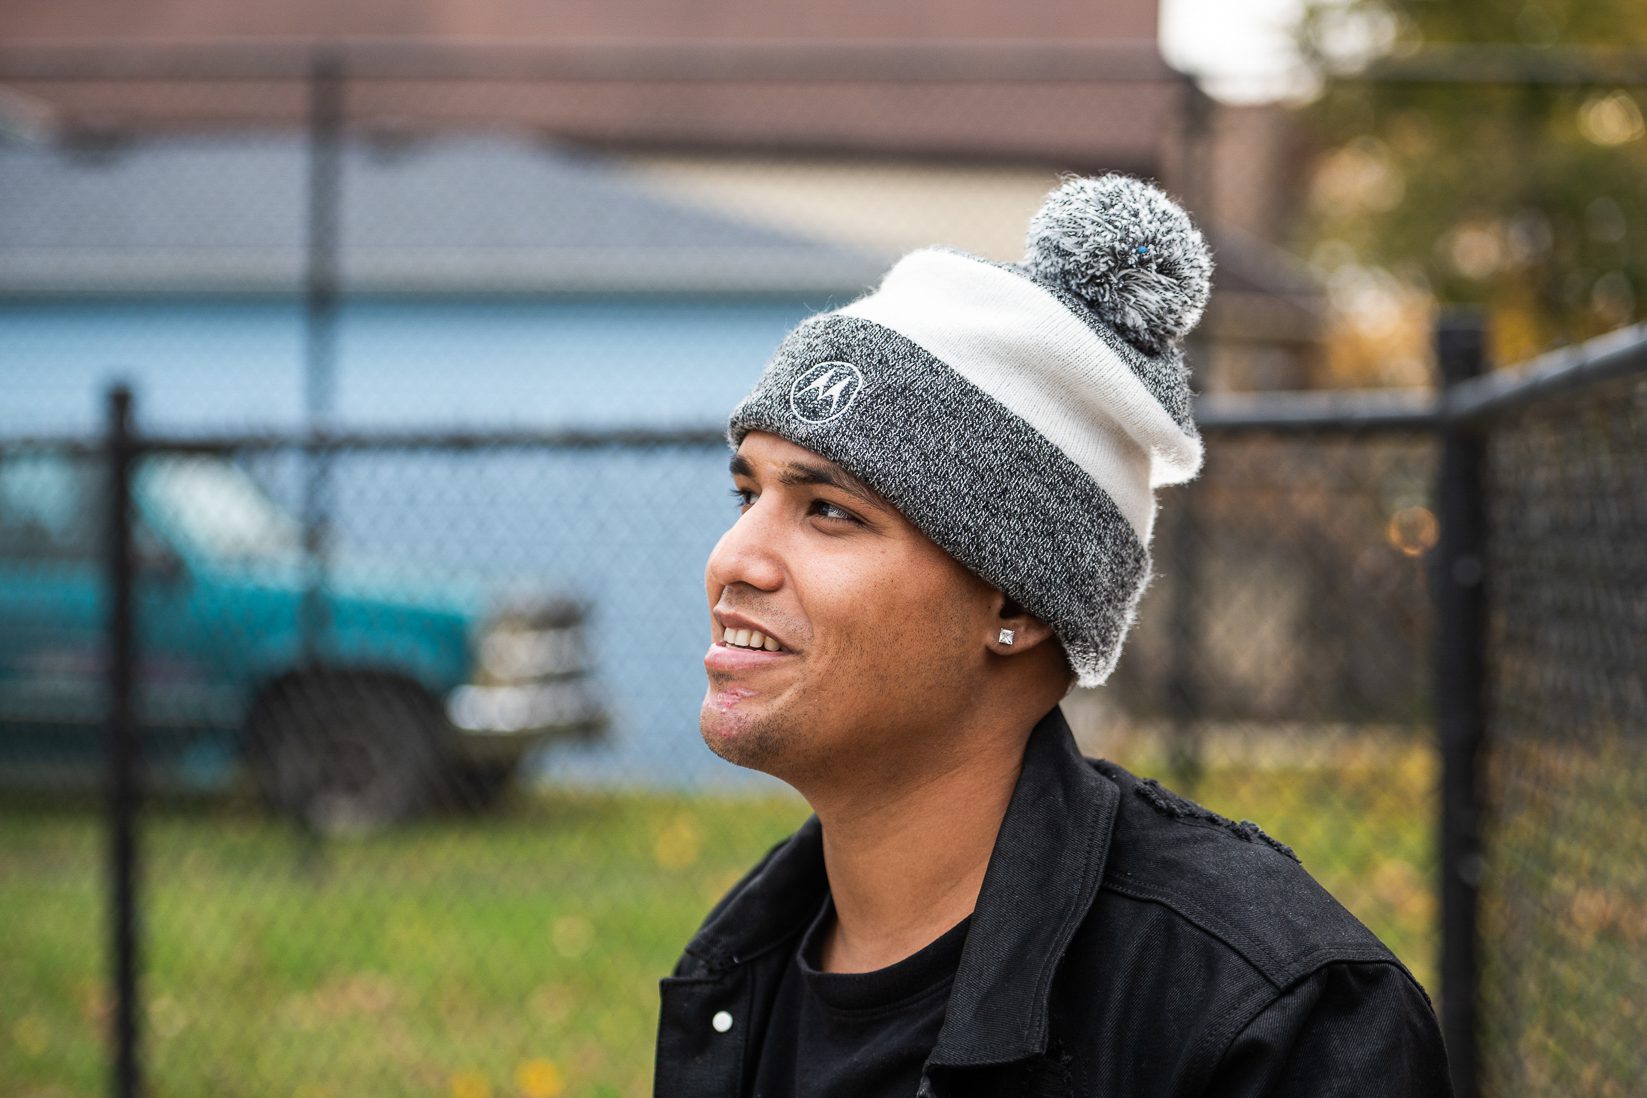 Nolram wears a gray and white beanie with a black shirt and jacket and black fence behind him